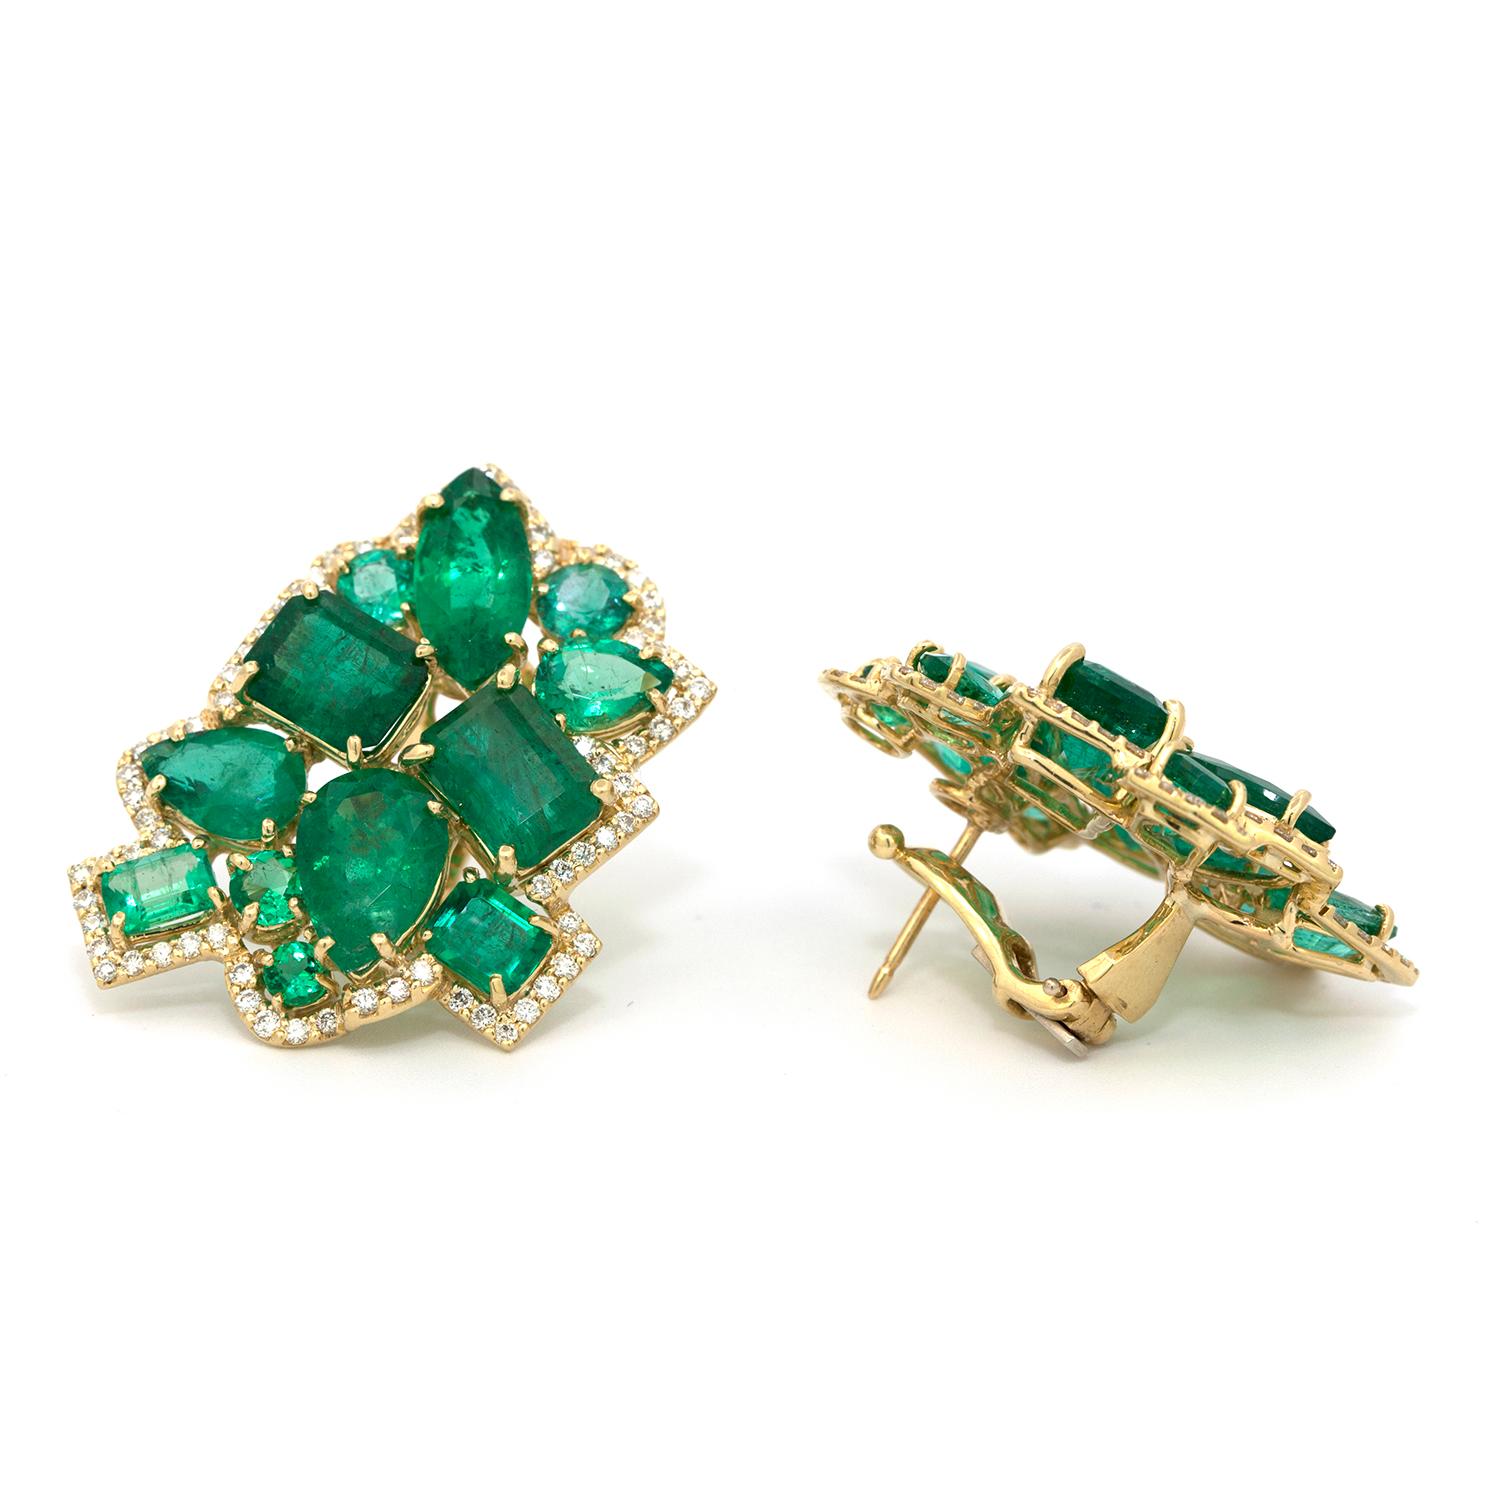 22 mixed shaped vintage emeralds that weigh 24.38 cts. that are set in a modern  18k yellow gold French clip earring that are outlined with 147 micro pave’ set diamonds, weighing 1.92 cts. that strengthen the geometric symmetry created by the multi